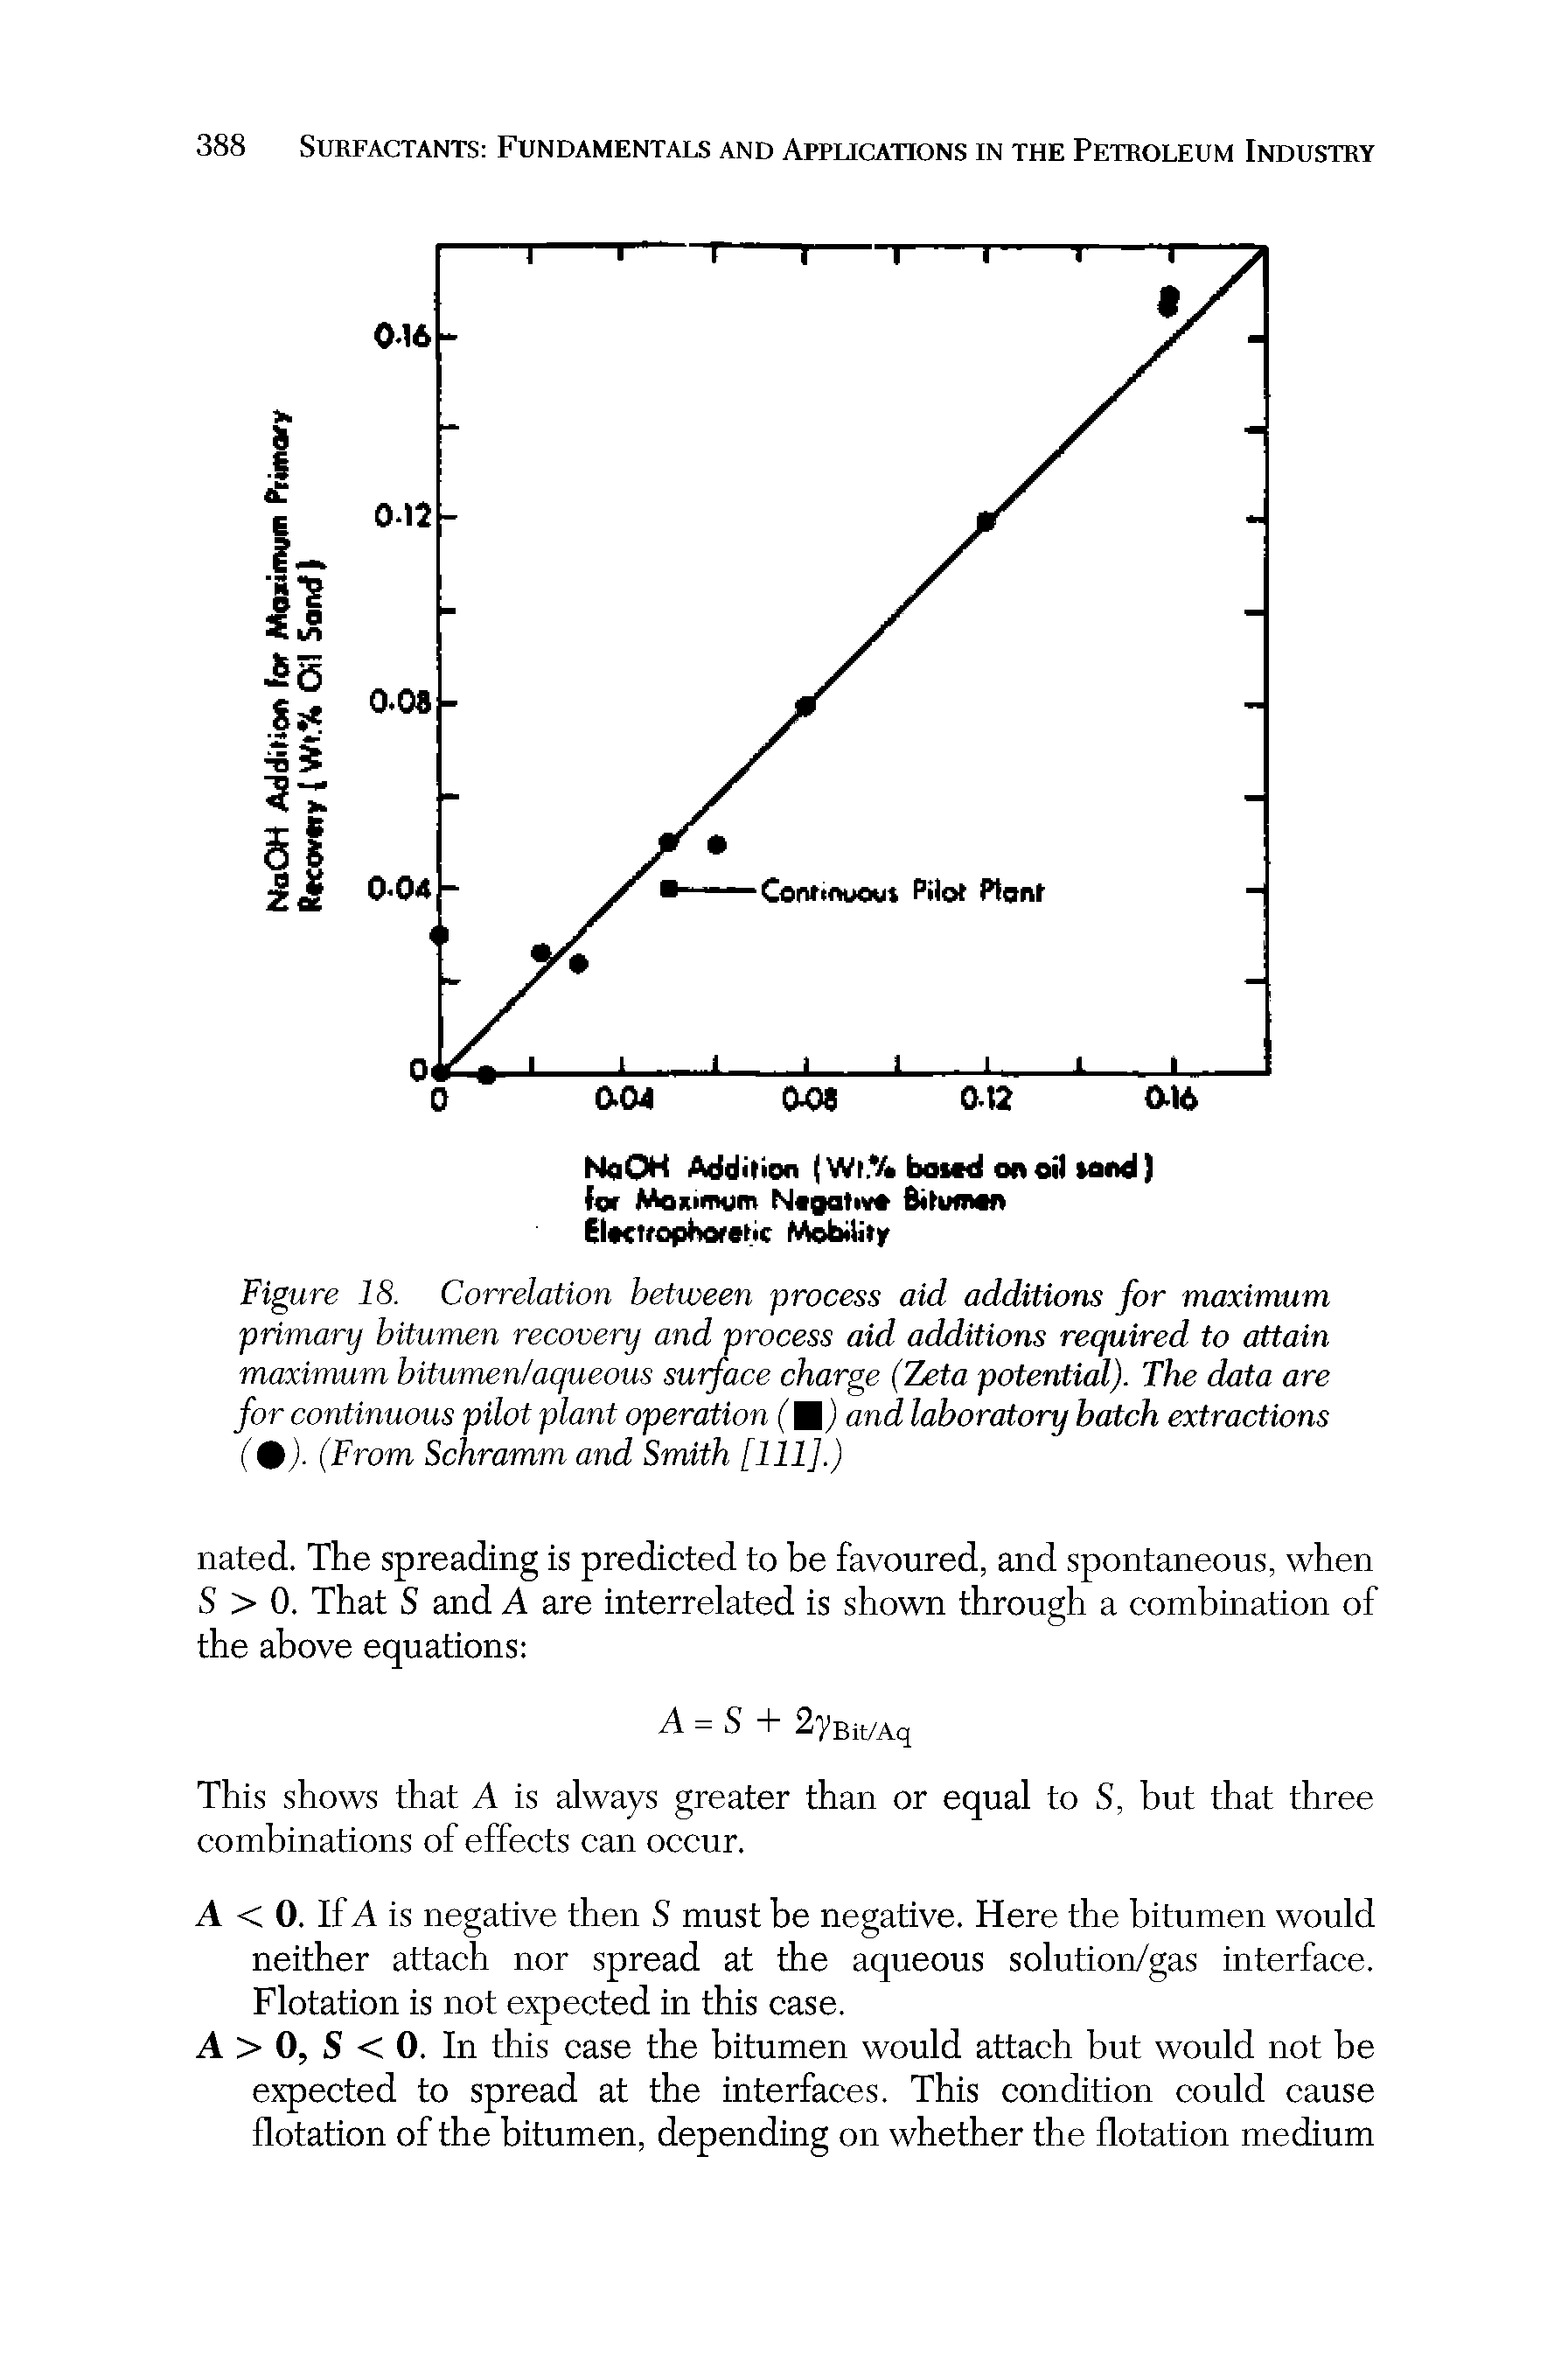 Figure 18. Correlation between process aid additions for maximum primary bitumen recovery and process aid additions required to attain maximum bitumen/aqueous surface charge (Zeta potential). The data are for continuous pilot plant operation (Hj and laboratory batch extractions (%). (From Schramm and Smith [111].)...